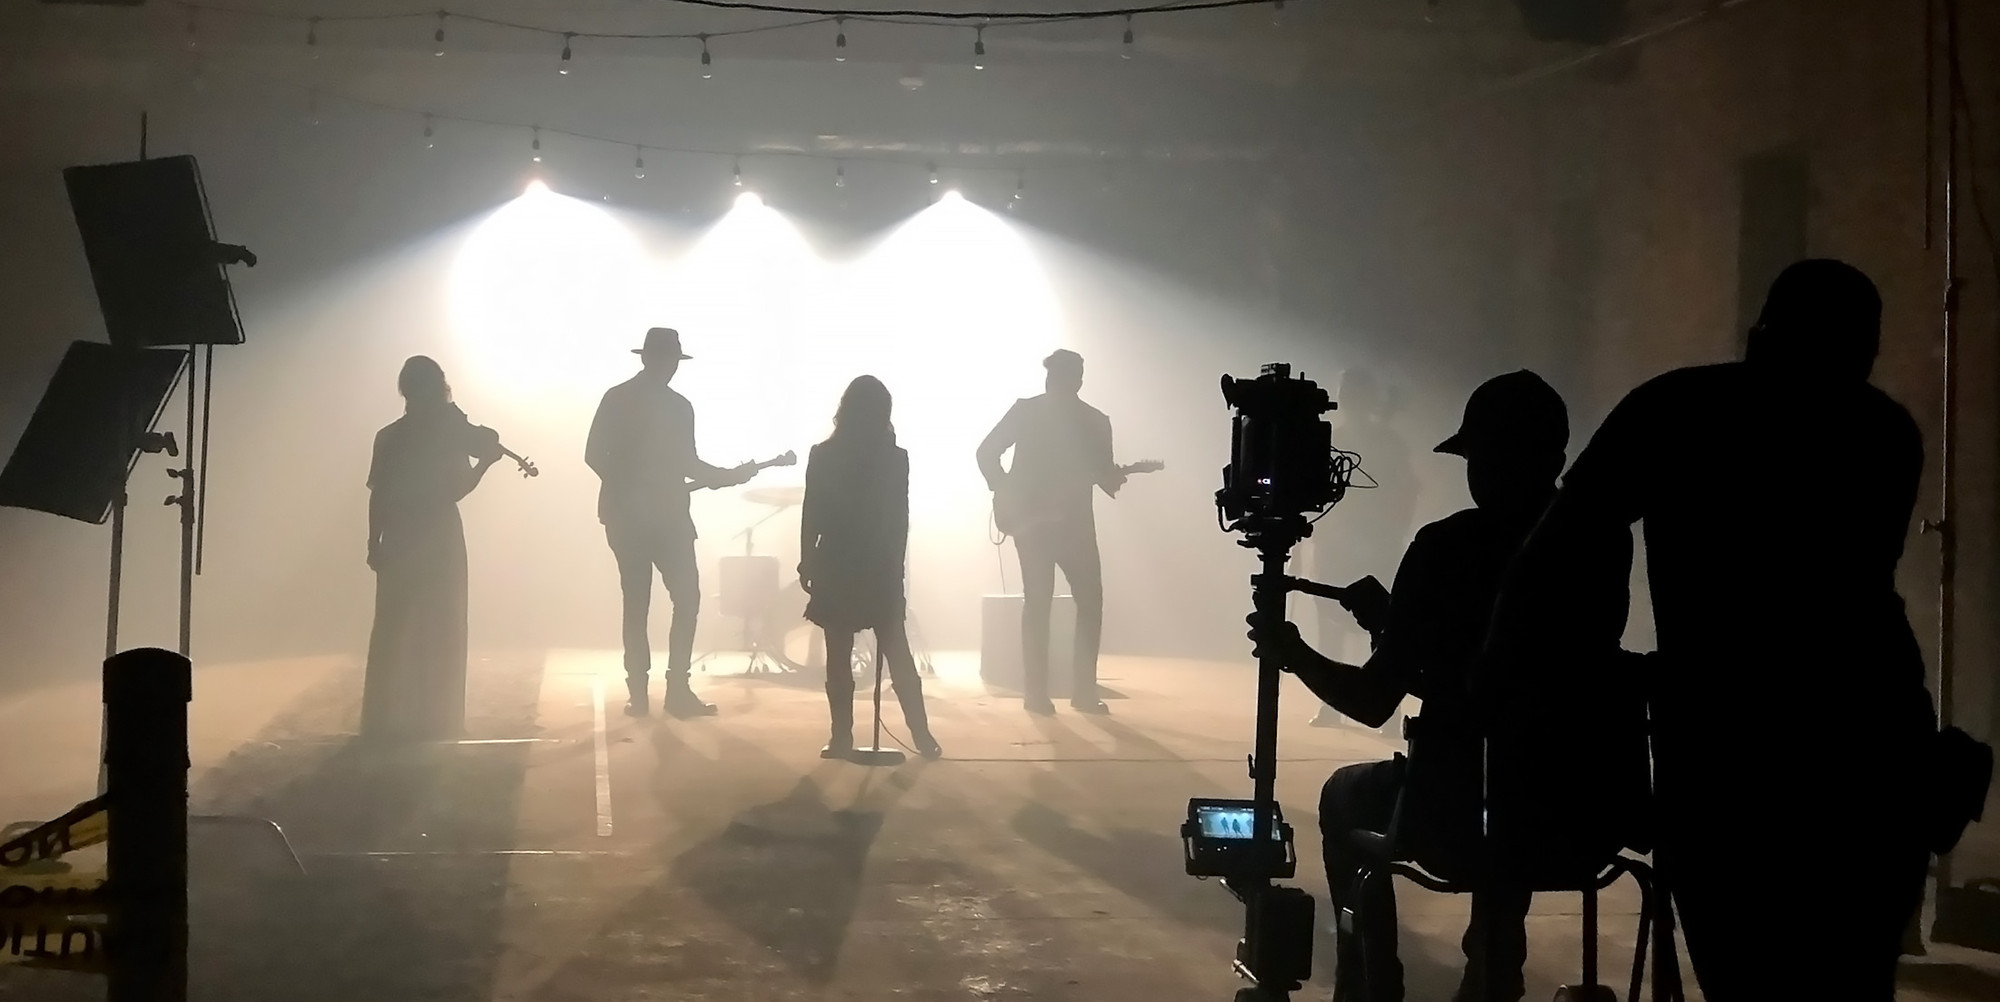 Behind the scenes of a band music video shoot